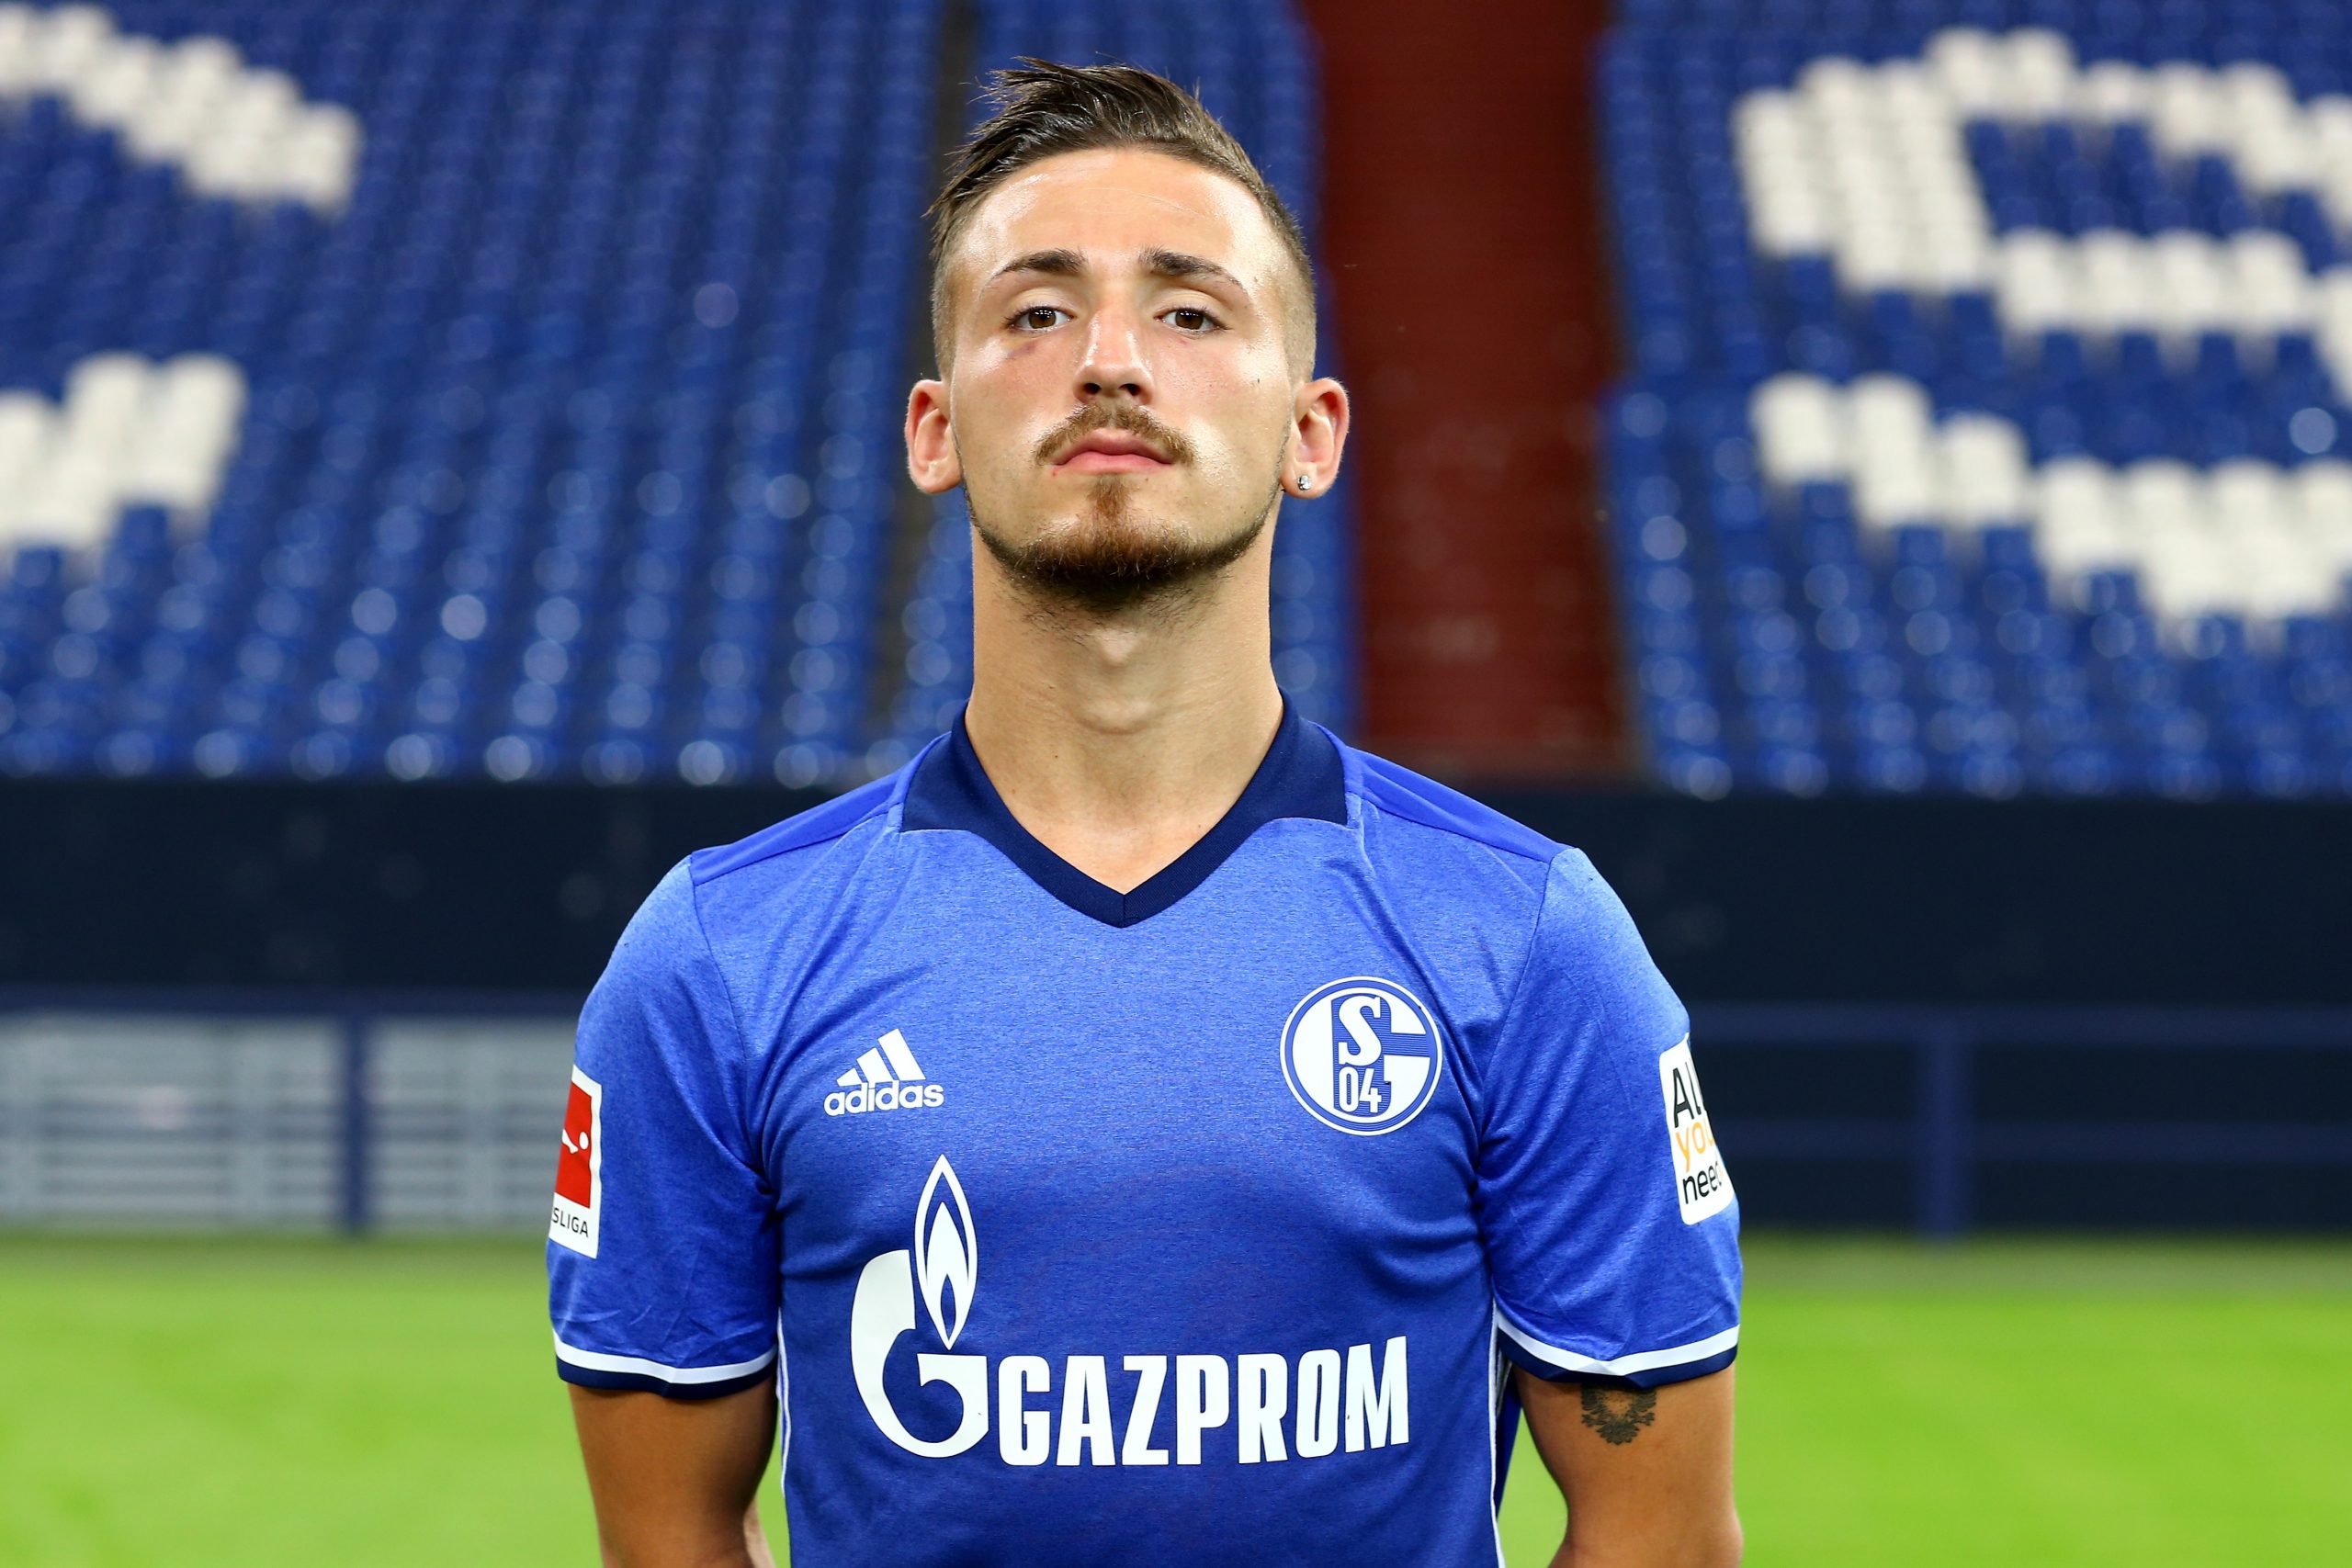 GELSENKIRCHEN, GERMANY - JULY 12:  Donis Avdijaj  of FC Schalke 04 poses during the team presentation at Veltins Arena on July 12, 2017 in Gelsenkirchen, Germany.  (Photo by Christof Koepsel/Bongarts/Getty Images)